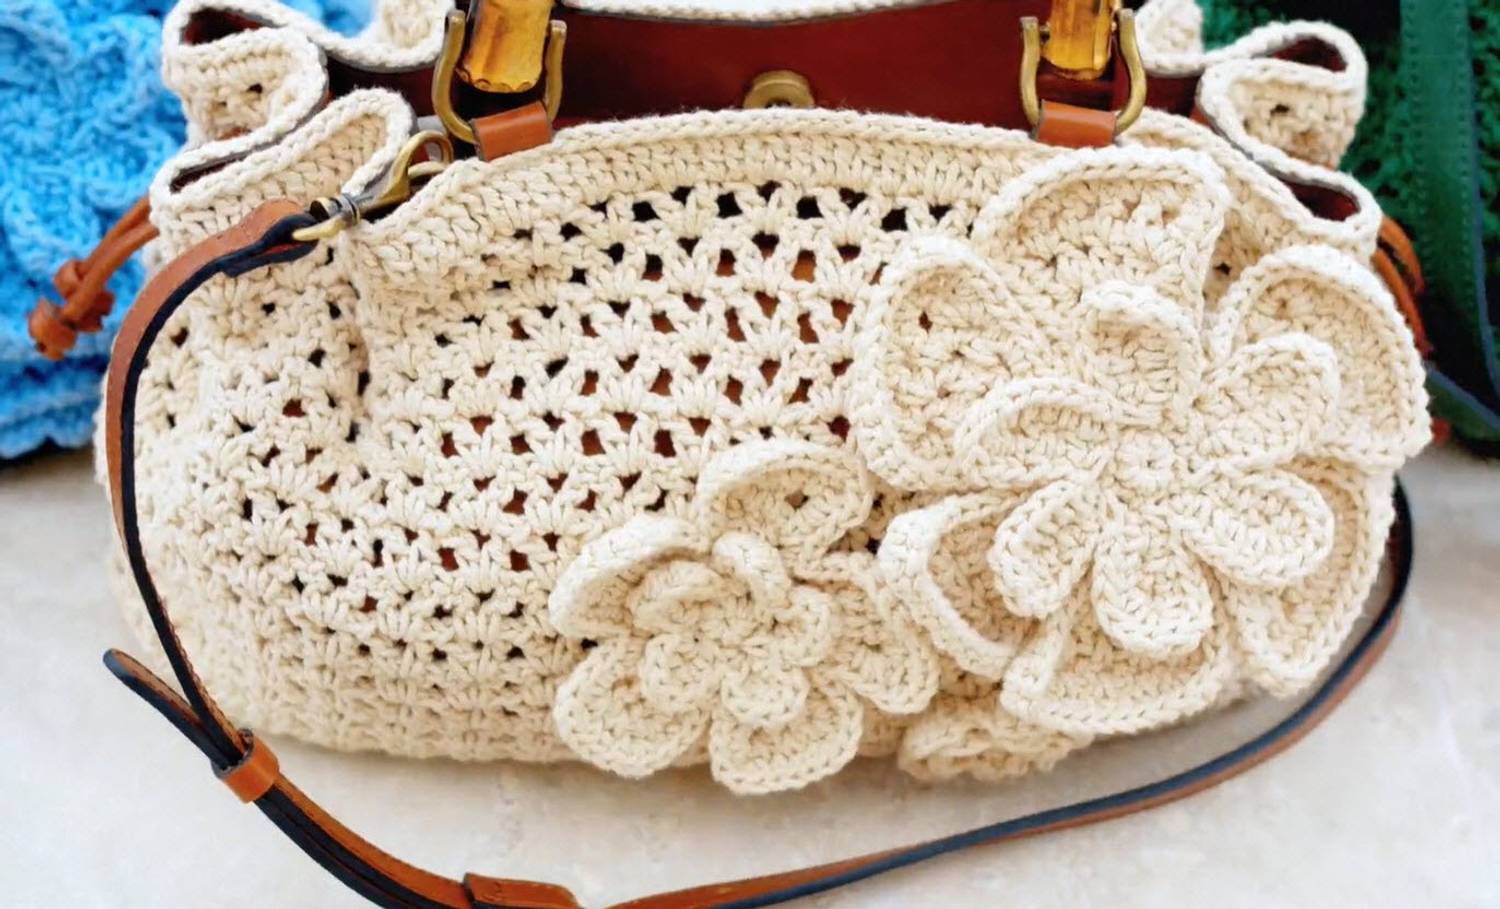 Vacation Style Crochet Bag With Adjustable Shoulder Strap